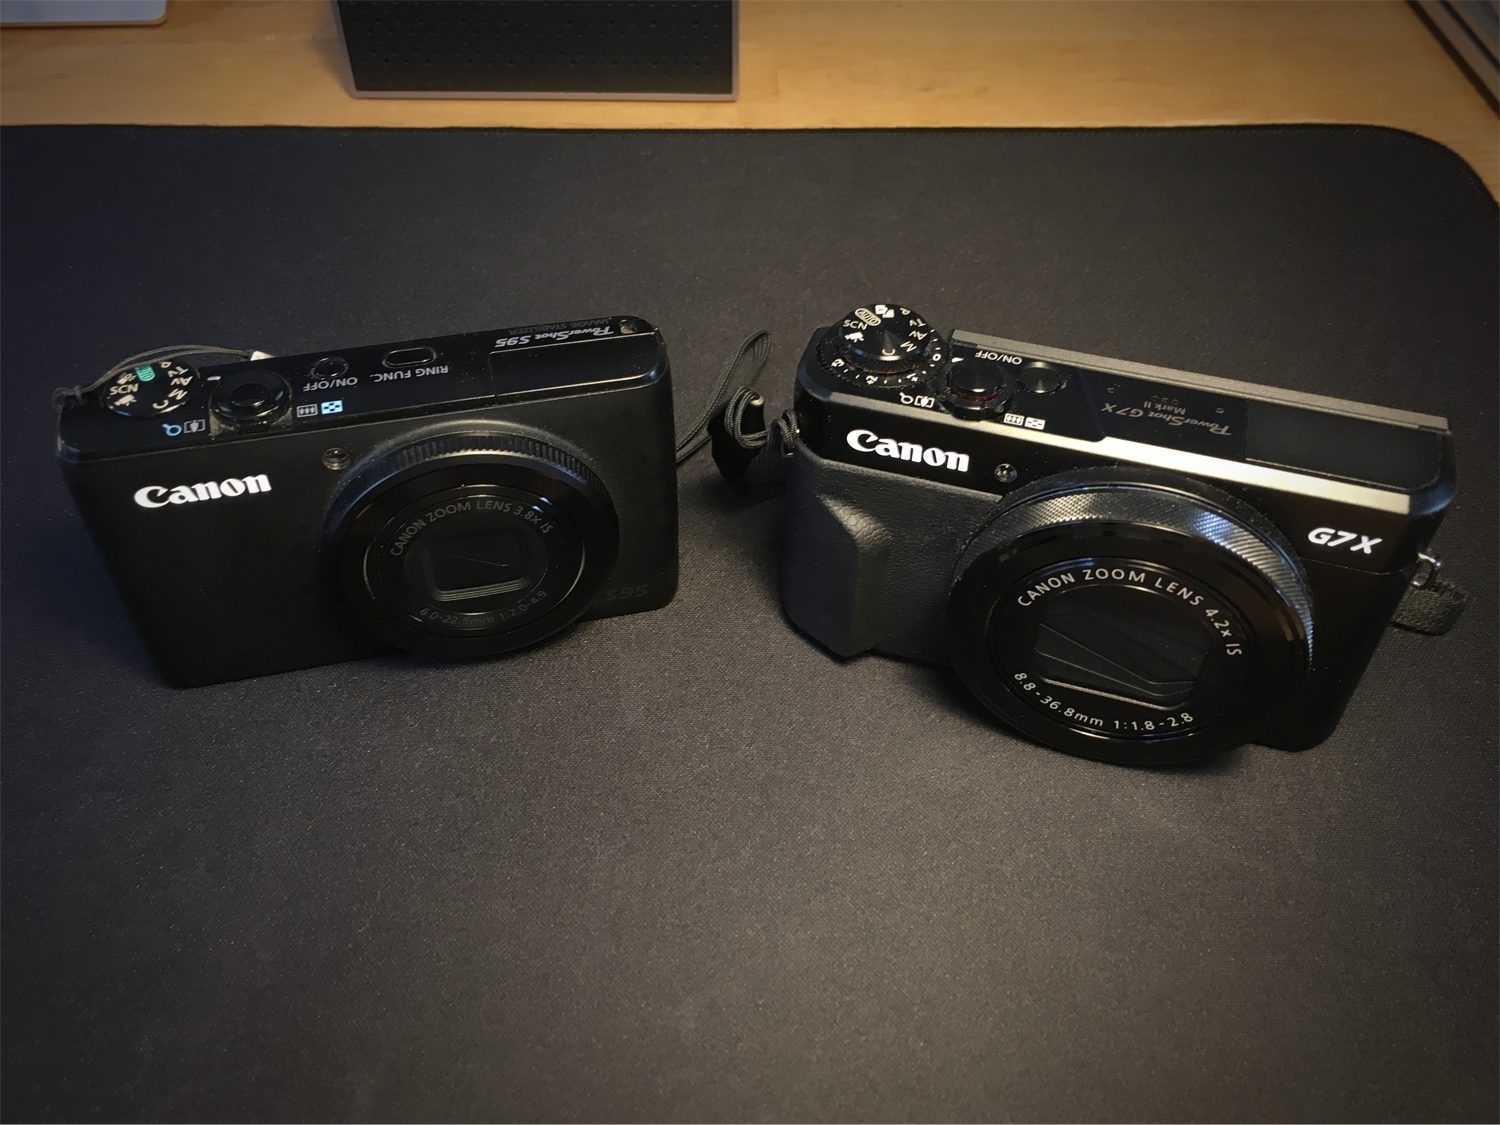 Powershot S95 and G7X MkII side by side